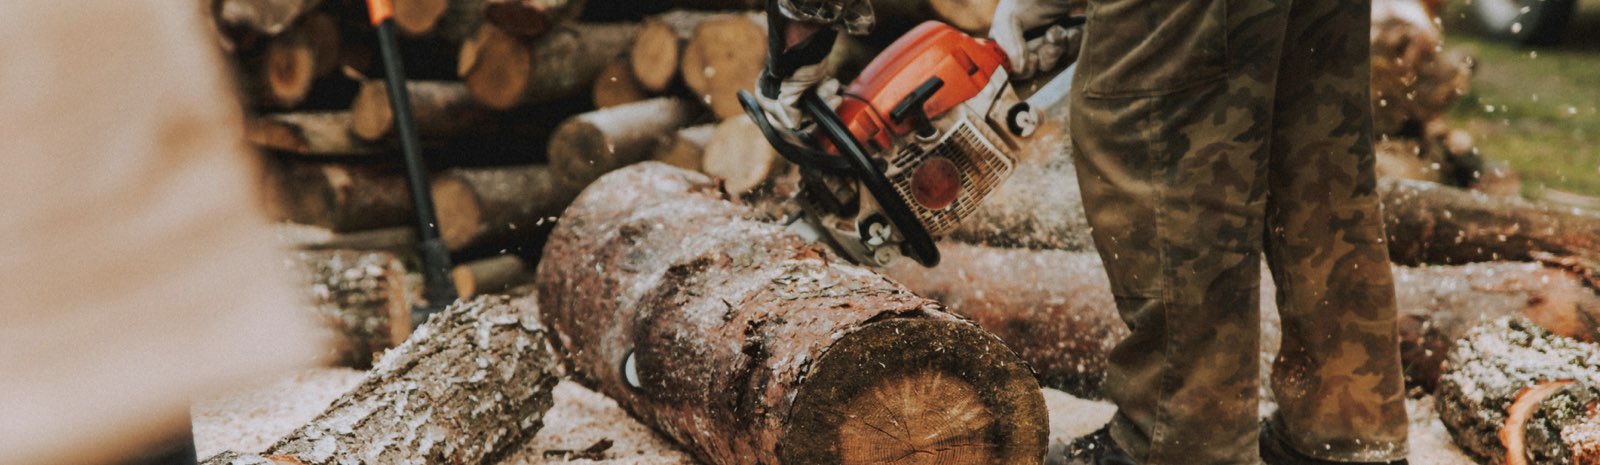 Man using a chainsaw to cut a tree trunk